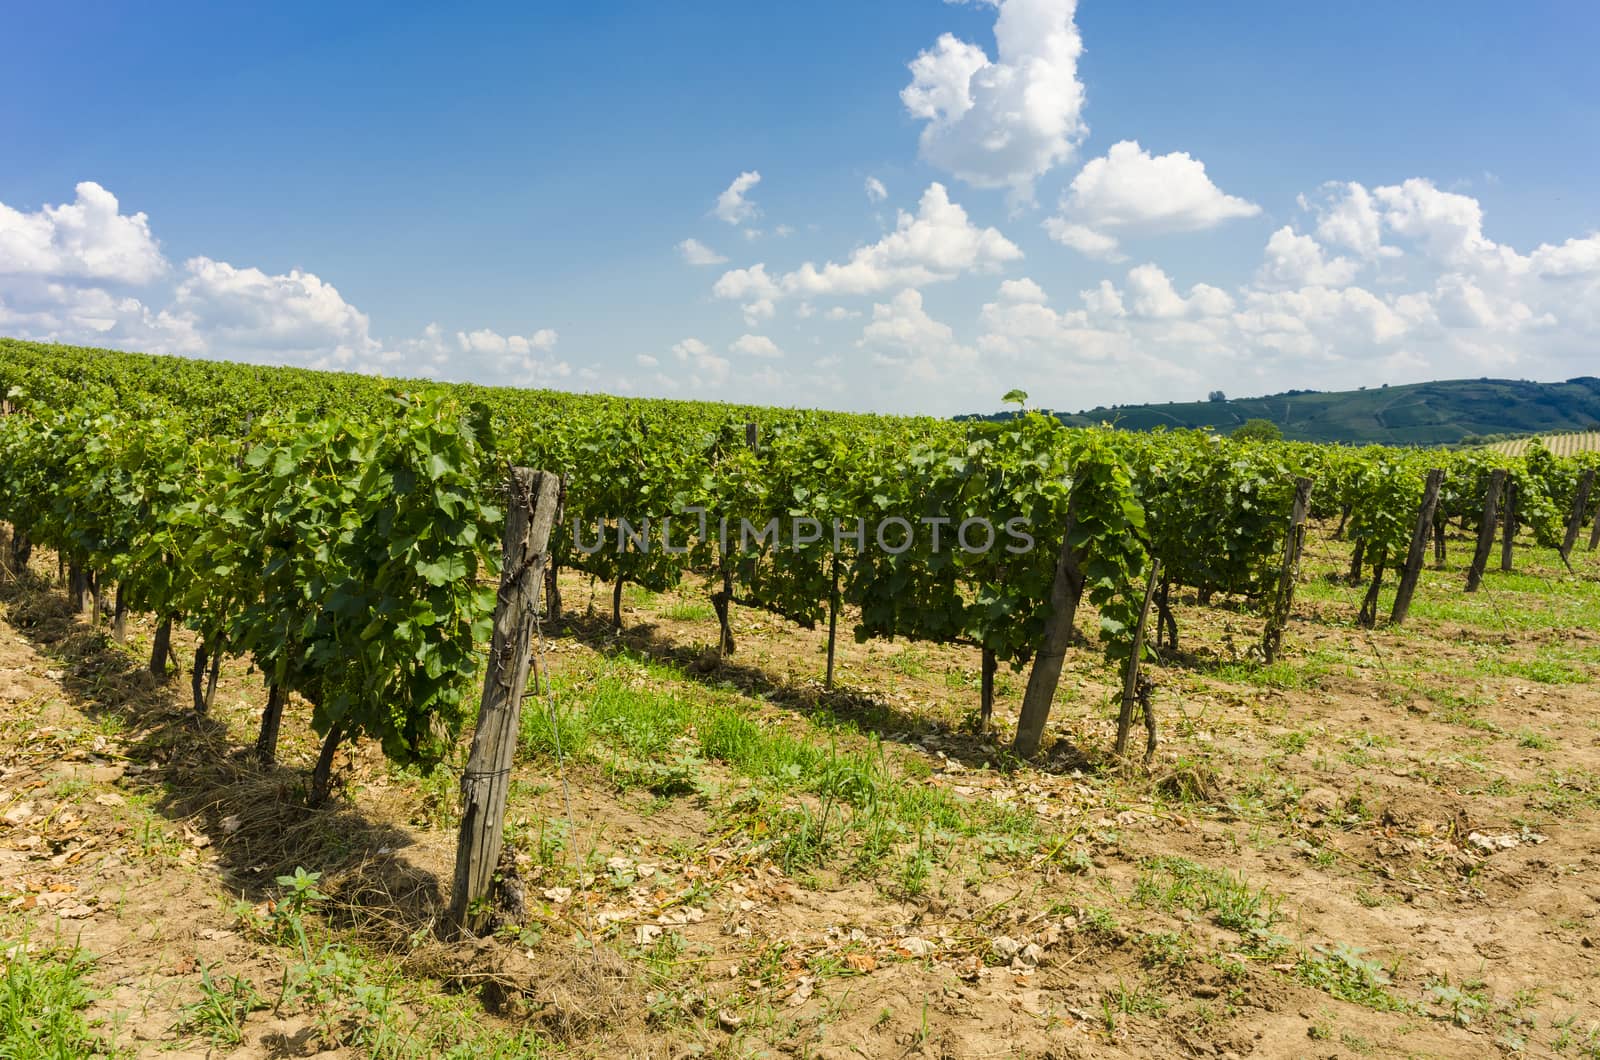 On of the many vineyards in Tokai, Hungary